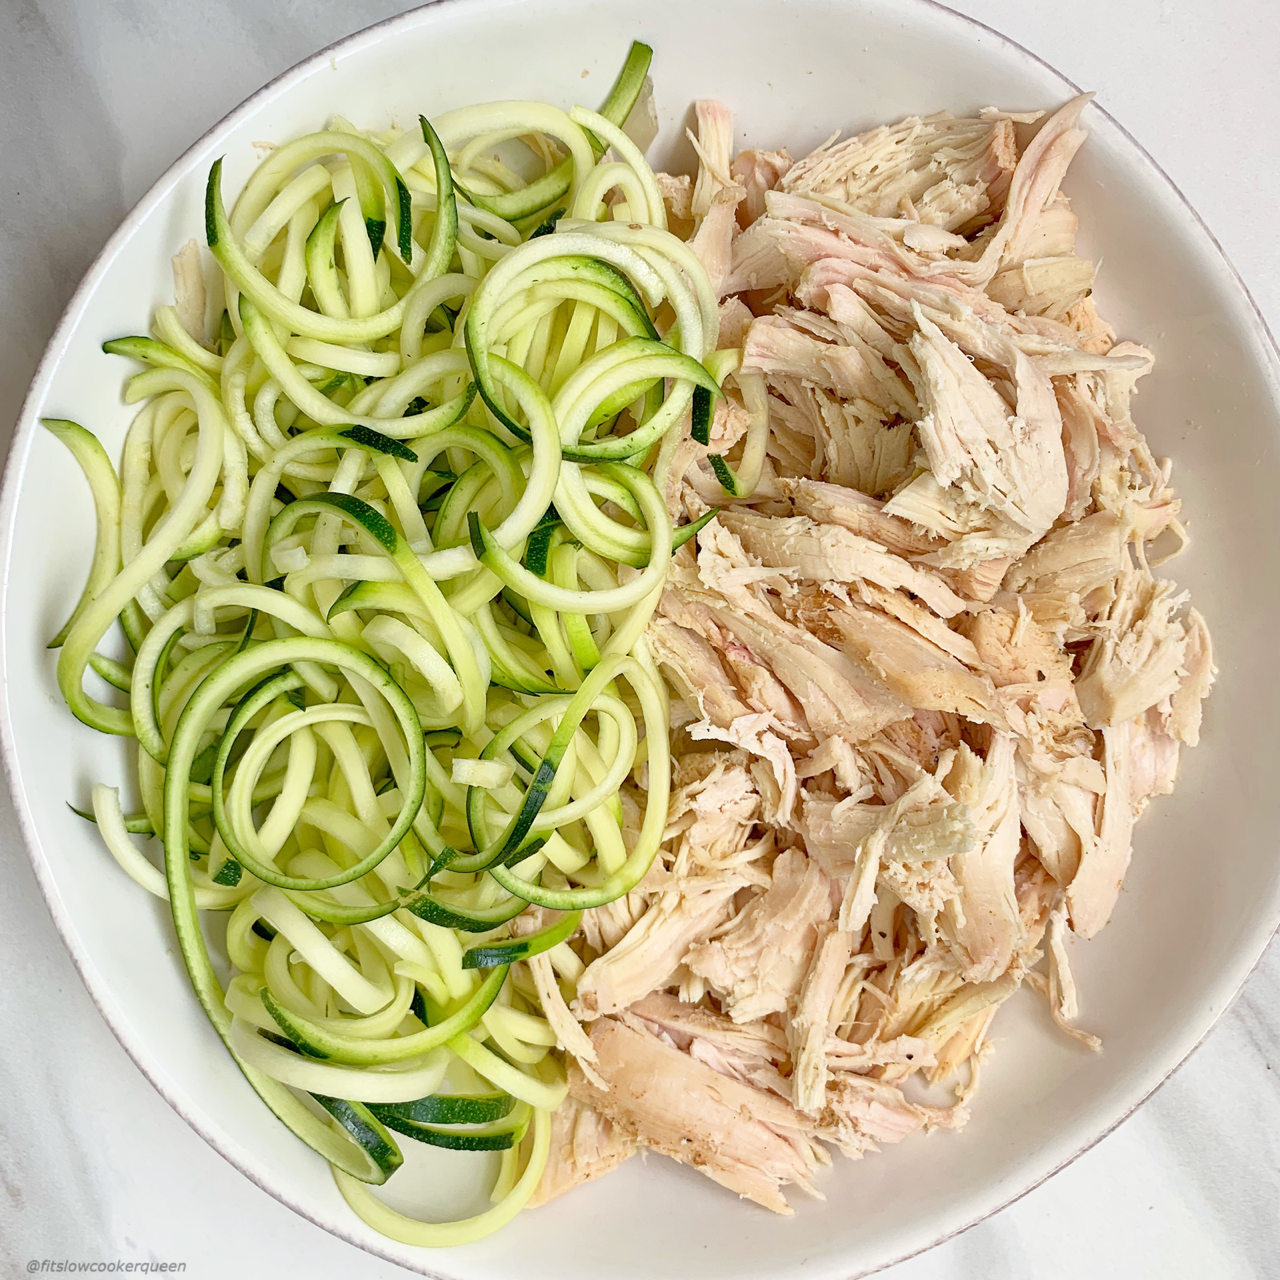 Zoodles lighten up this low-carb, paleo, and whole30 chicken soup recipe that can be made in your slow cooker or Instant Pot.